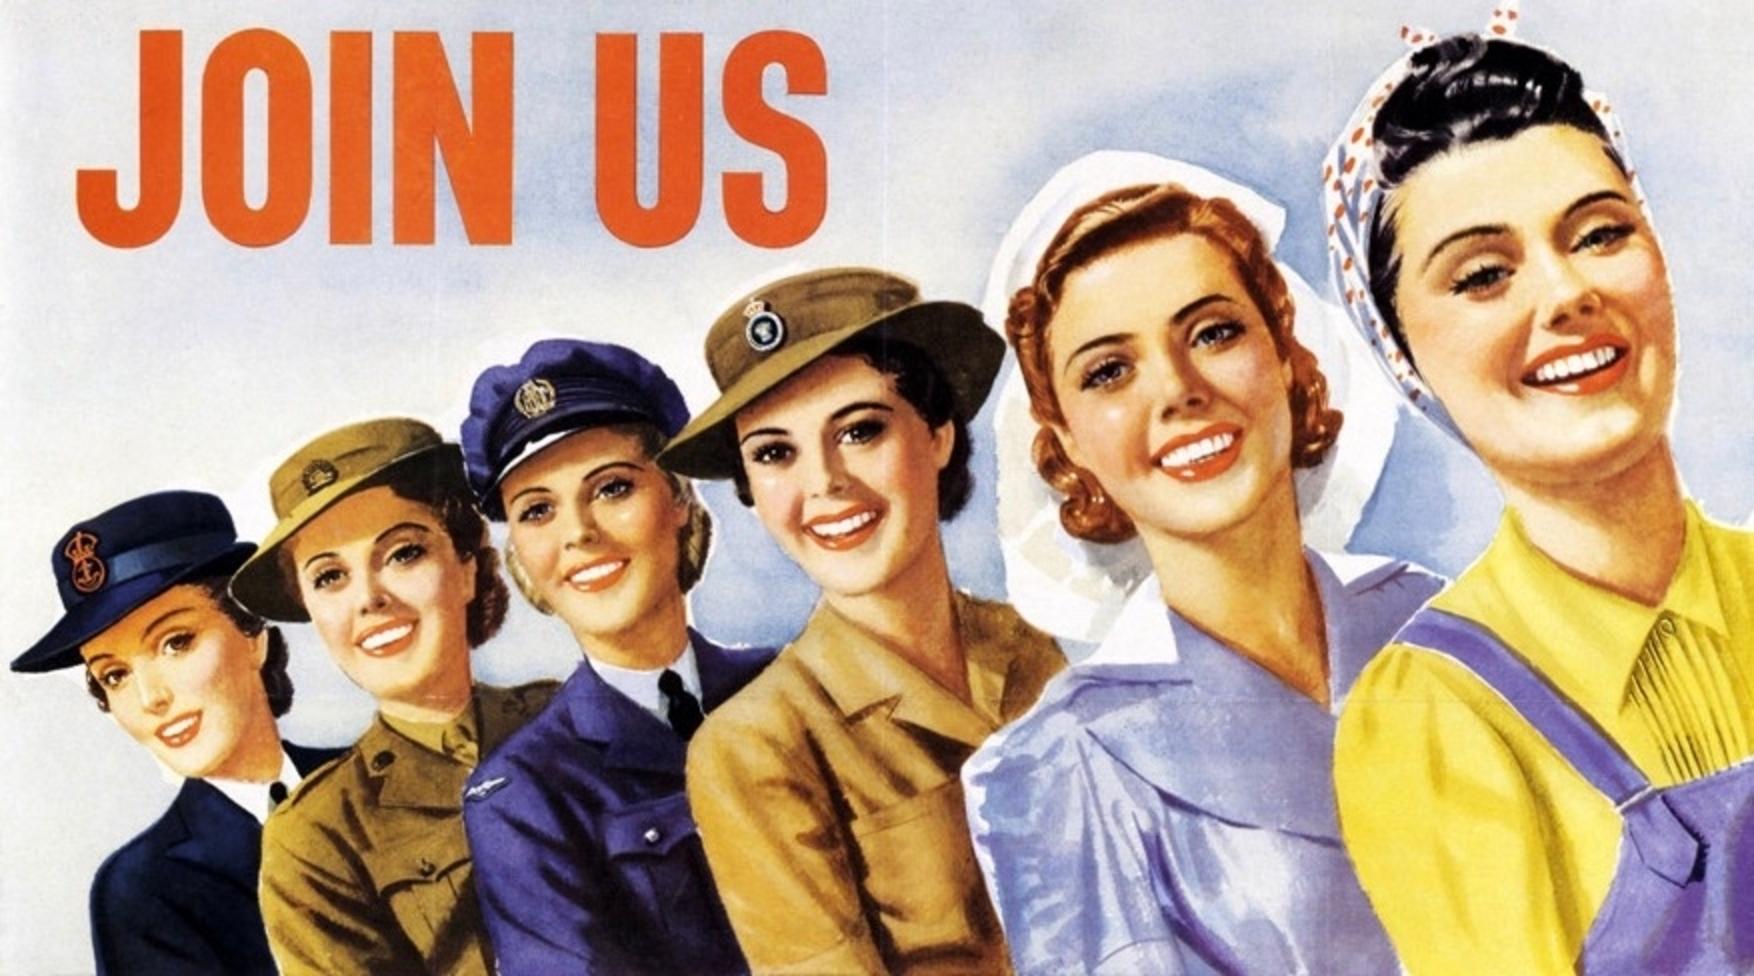 Historians say World War II could not have been won without an ethic of social collective action, sacrifice and fearless civic involvement on the U.S. homefront. That movement was galvanized by women.  Crawford says it's time to reconjure the spirt of the Greatest Generation.